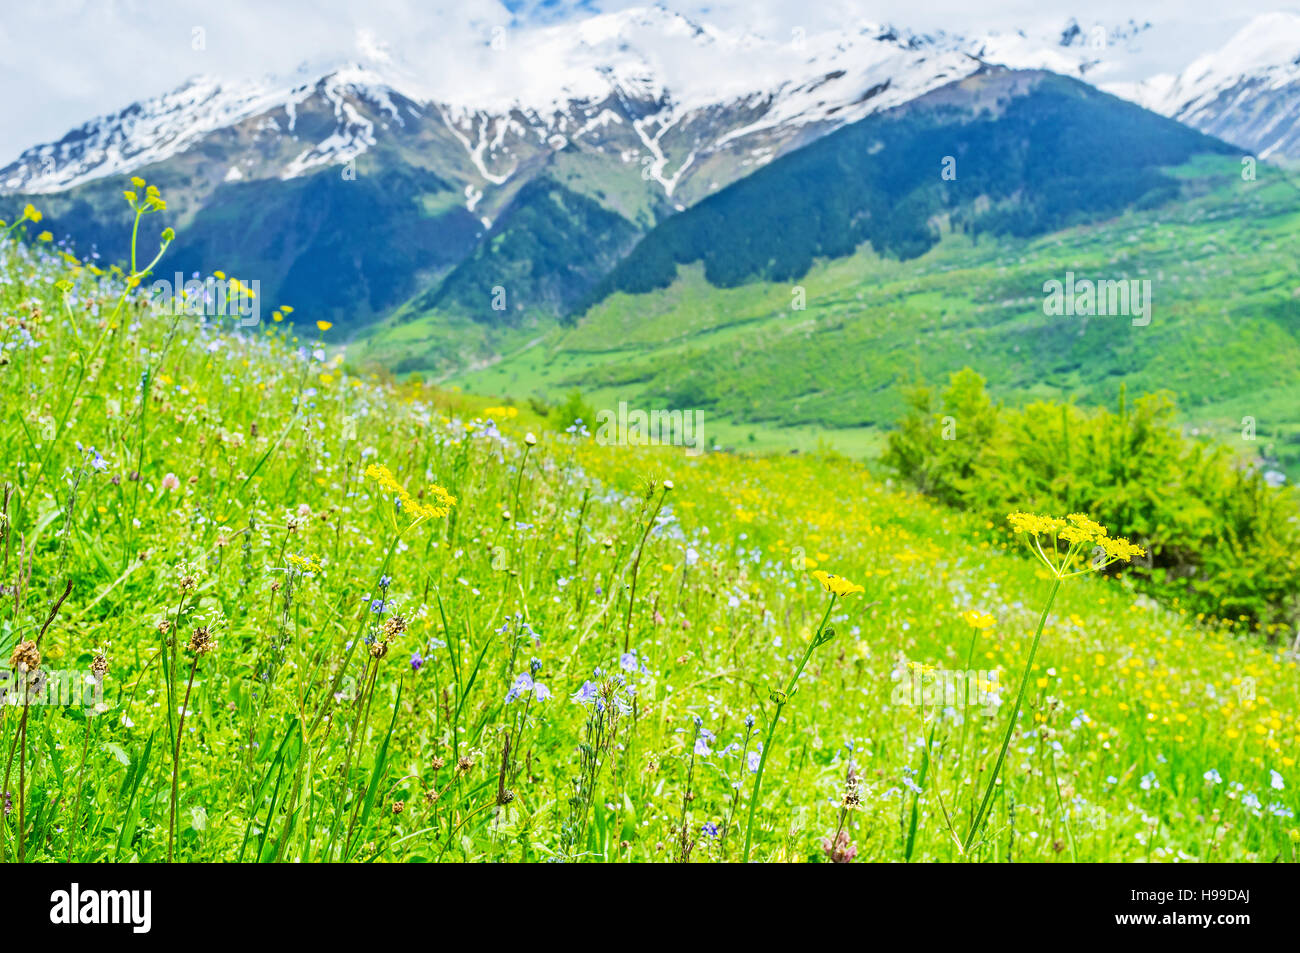 The mountains of Upper Svaneti boast the perfect juicy meadows with different wildflowers, the best choice for pastures, Mestia, Georgia. Stock Photo